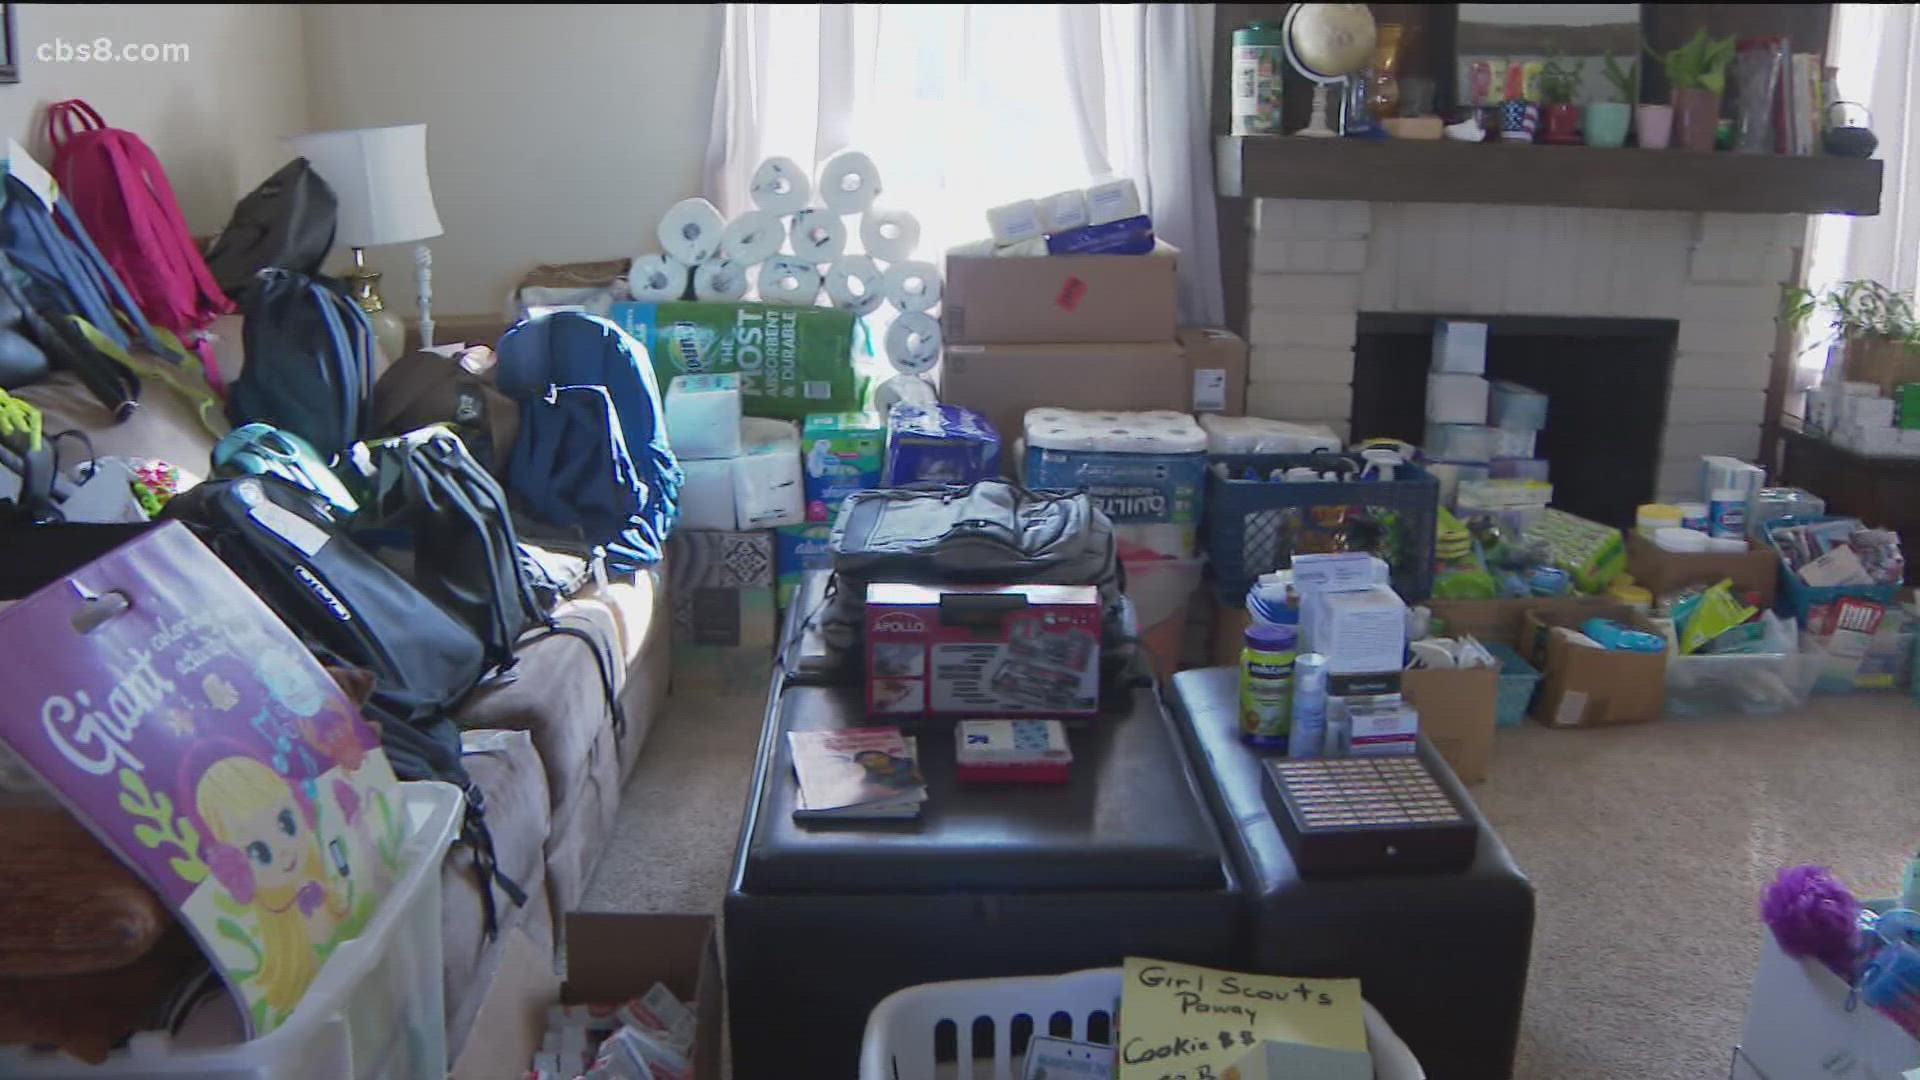 As part of the "Helping El Cajon Refugees" Facebook group, Barbara Cummings stores household goods in her San Diego home and toiletries to give to refugees.